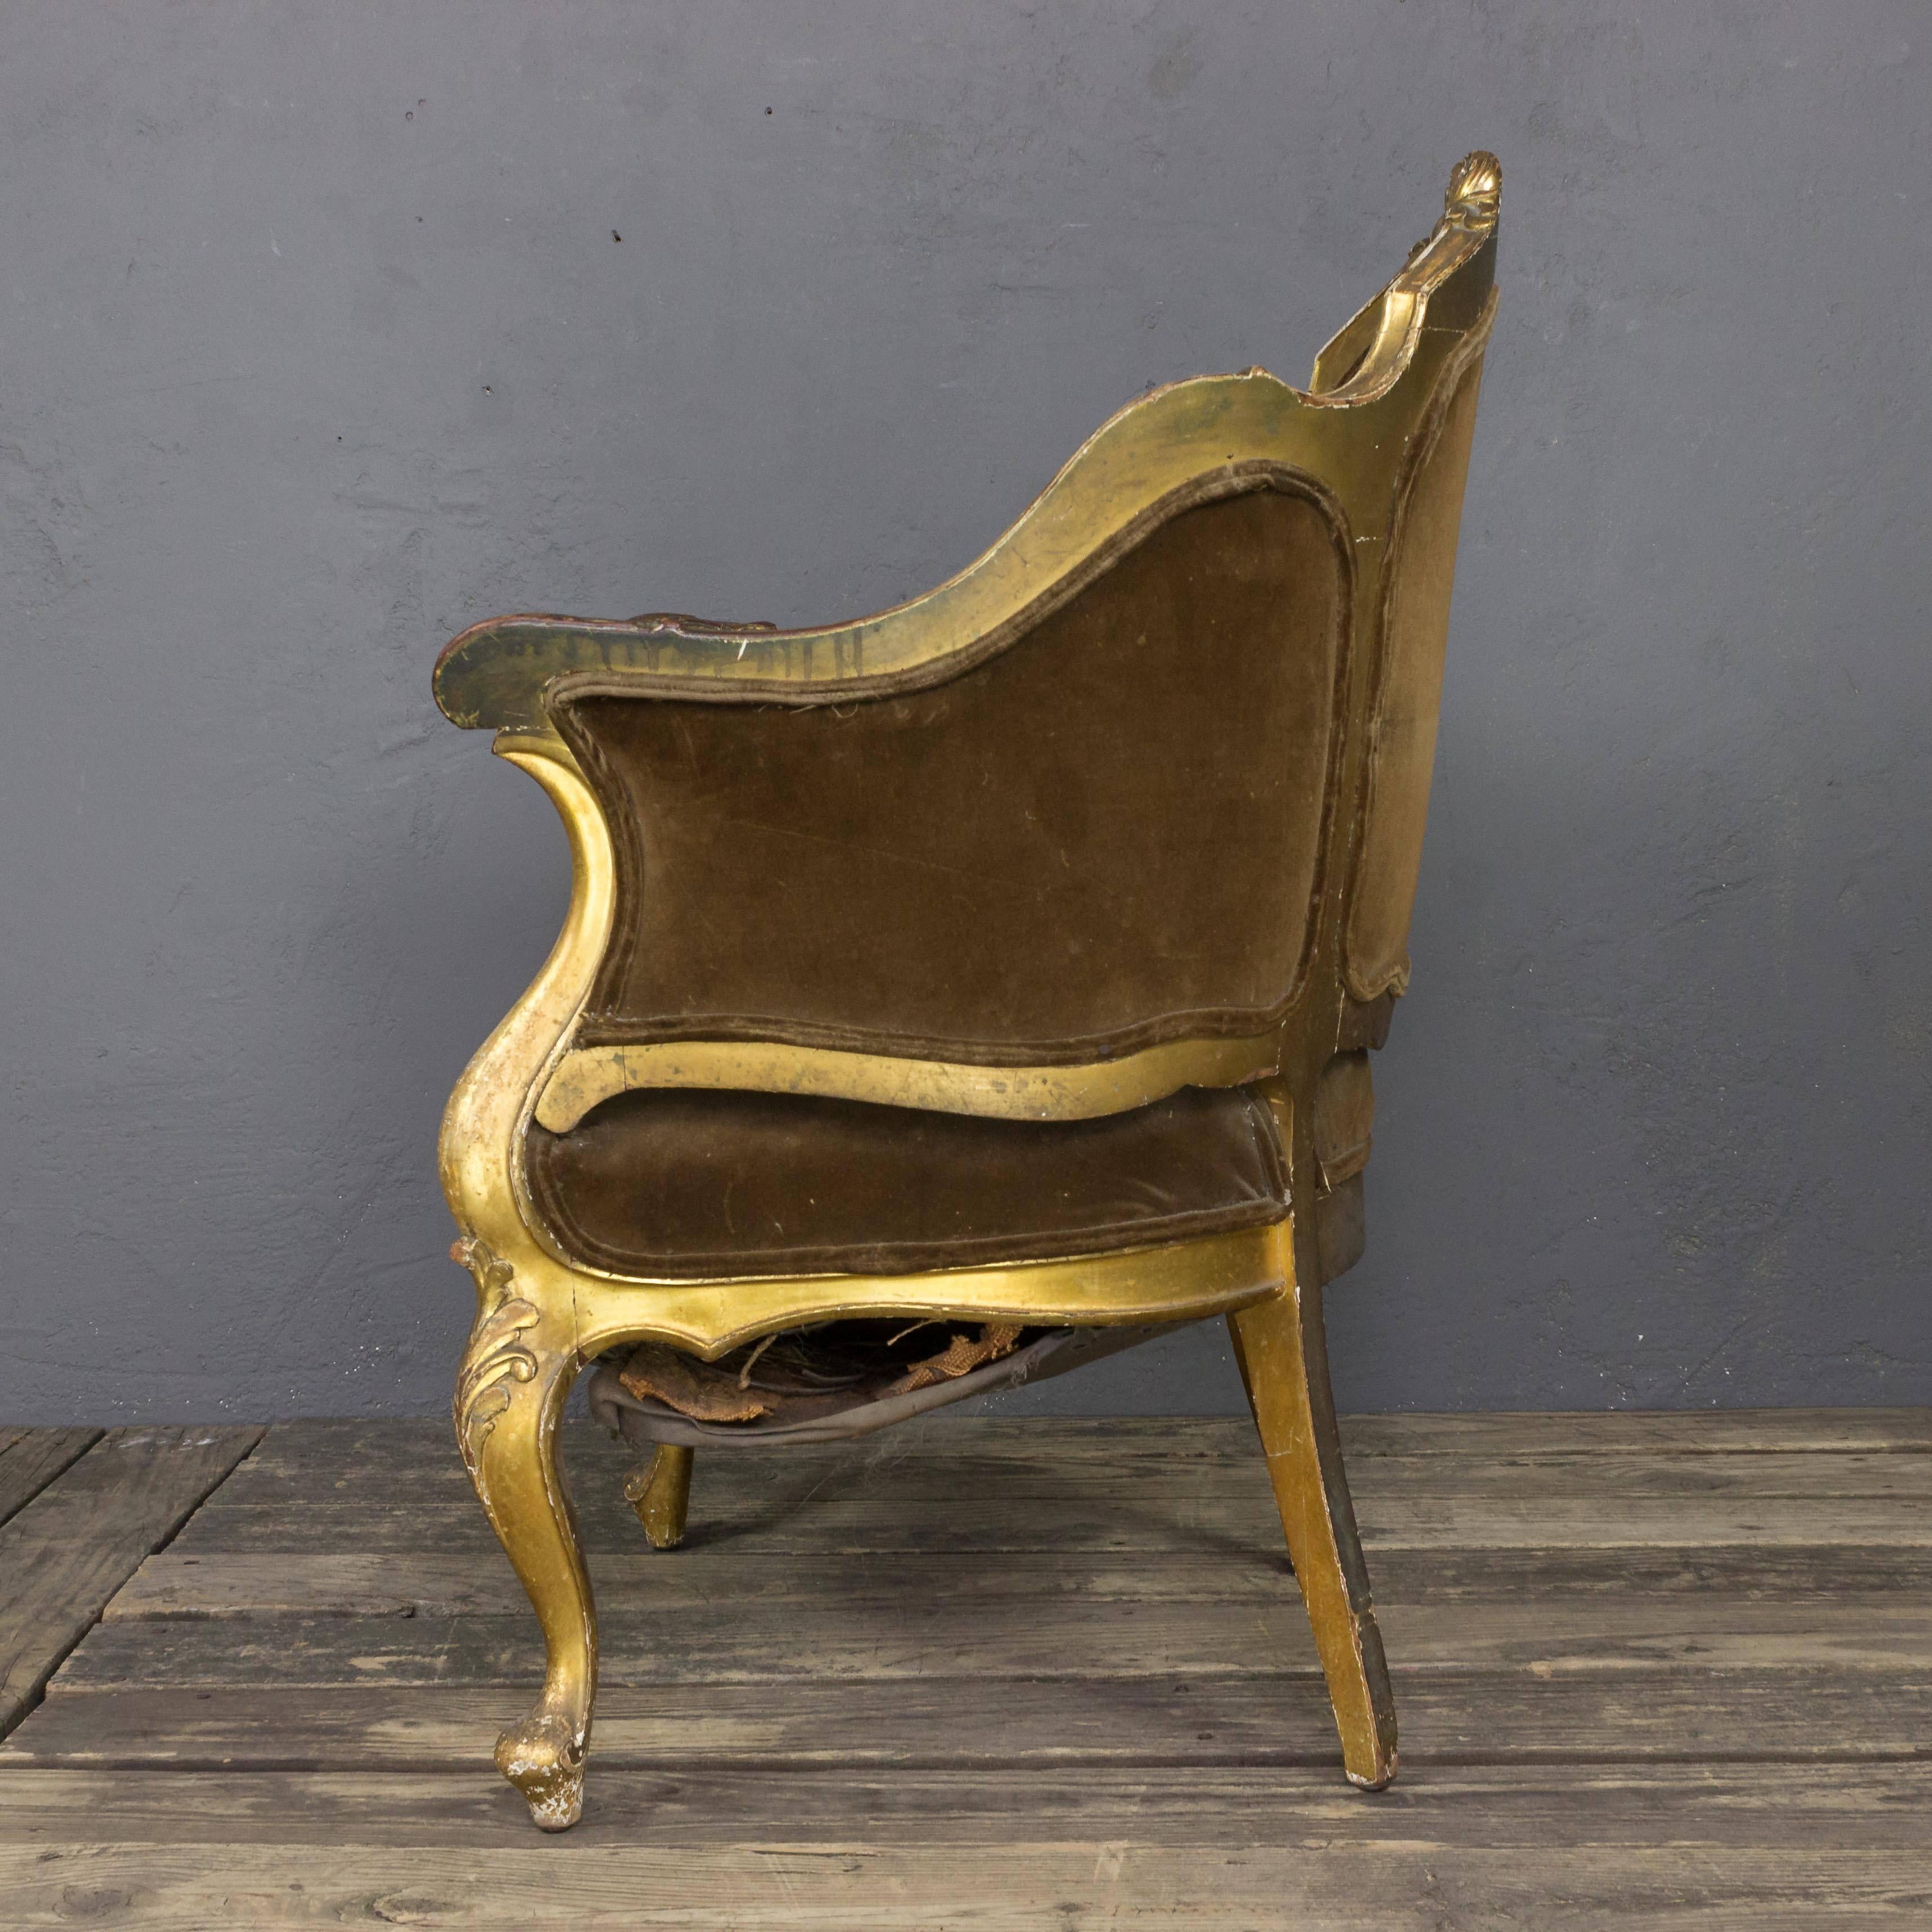 An exquisite French 19th century giltwood armchair. This one-of-a-kind piece is the perfect bridge between new and old school styles, blending notes of classic aesthetics with modern trends. Every curve of the carved wood frame is complemented